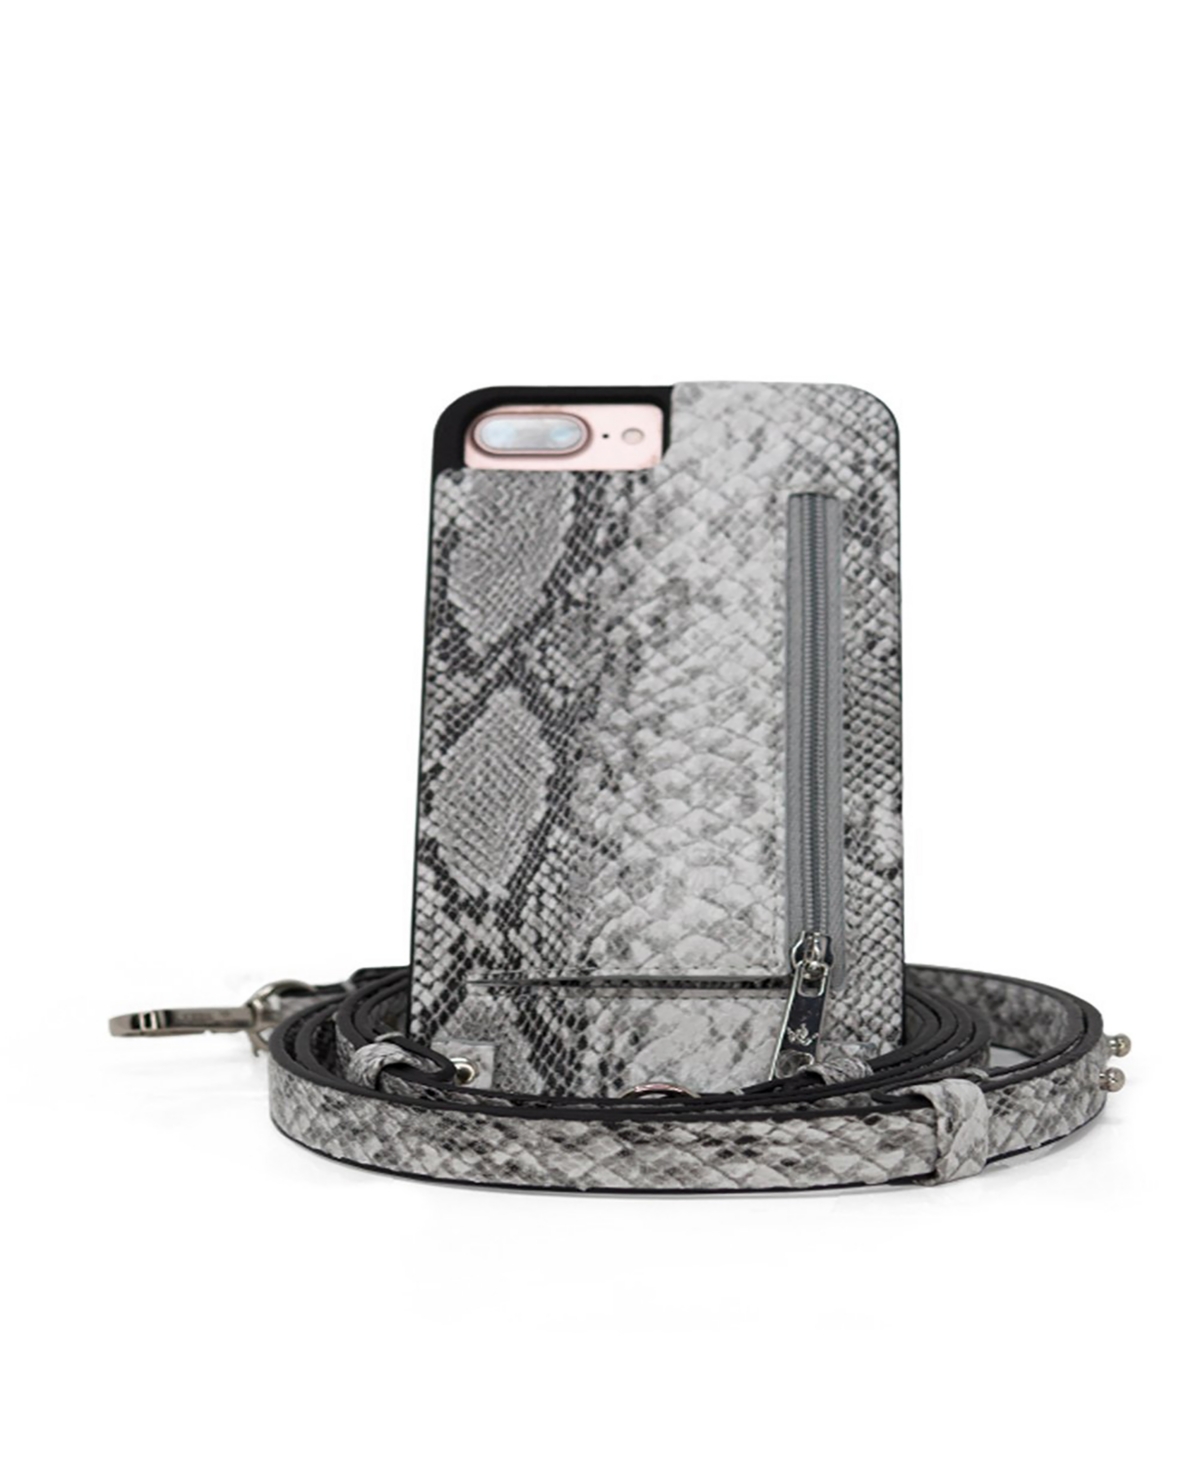 Hera Cases Crossbody iPhone Plus Case with Strap Wallet